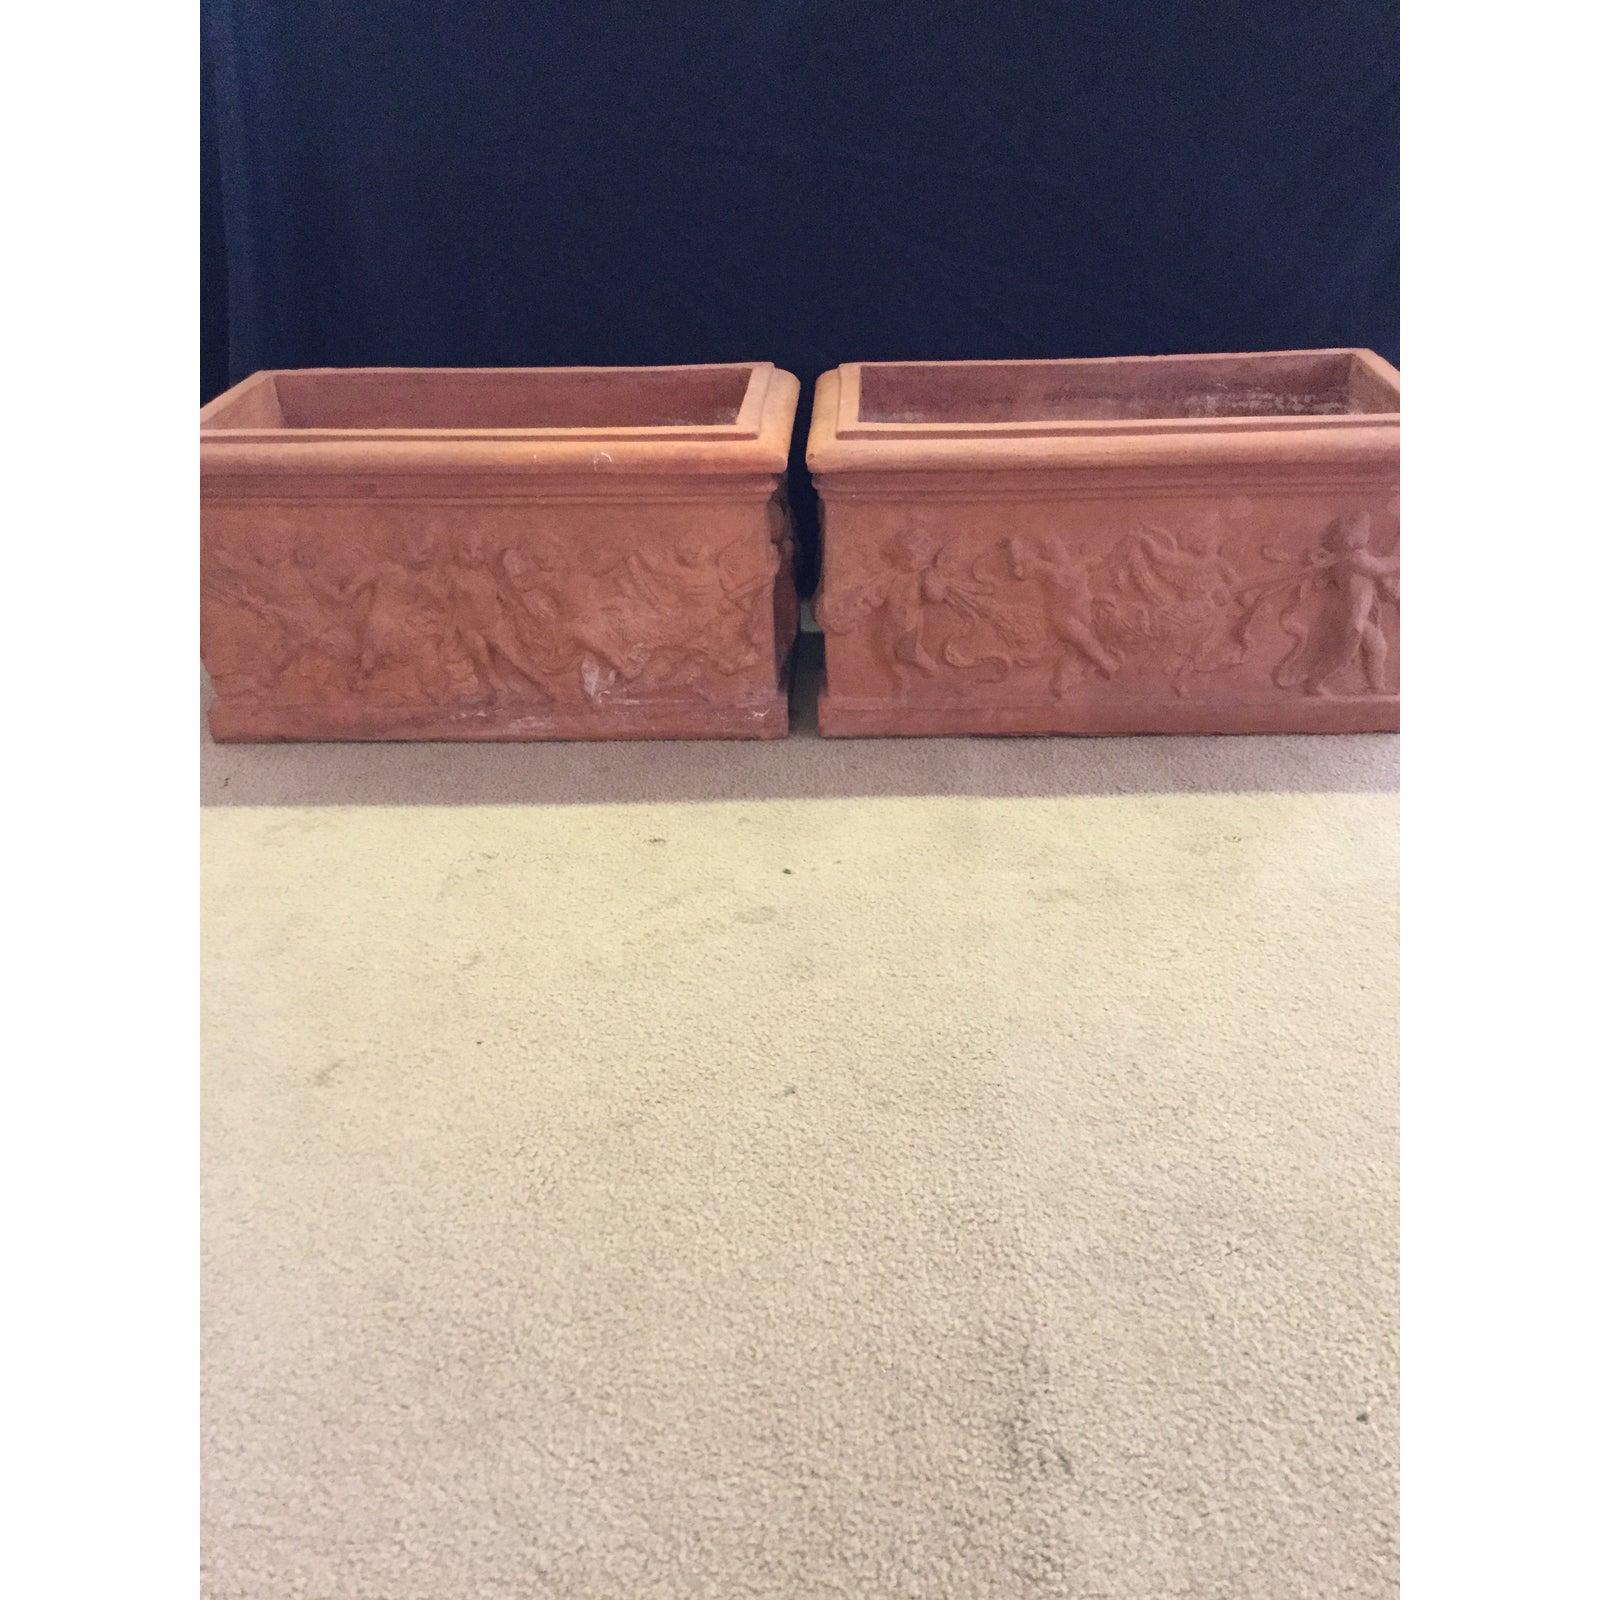 Beautiful pair of antique Italian terracotta garden planters with cherubs. All four sides of this pair of garden planters have different motifs and date to the 1920s. This lovely pair of antique Italian terracotta planters have dimensions as